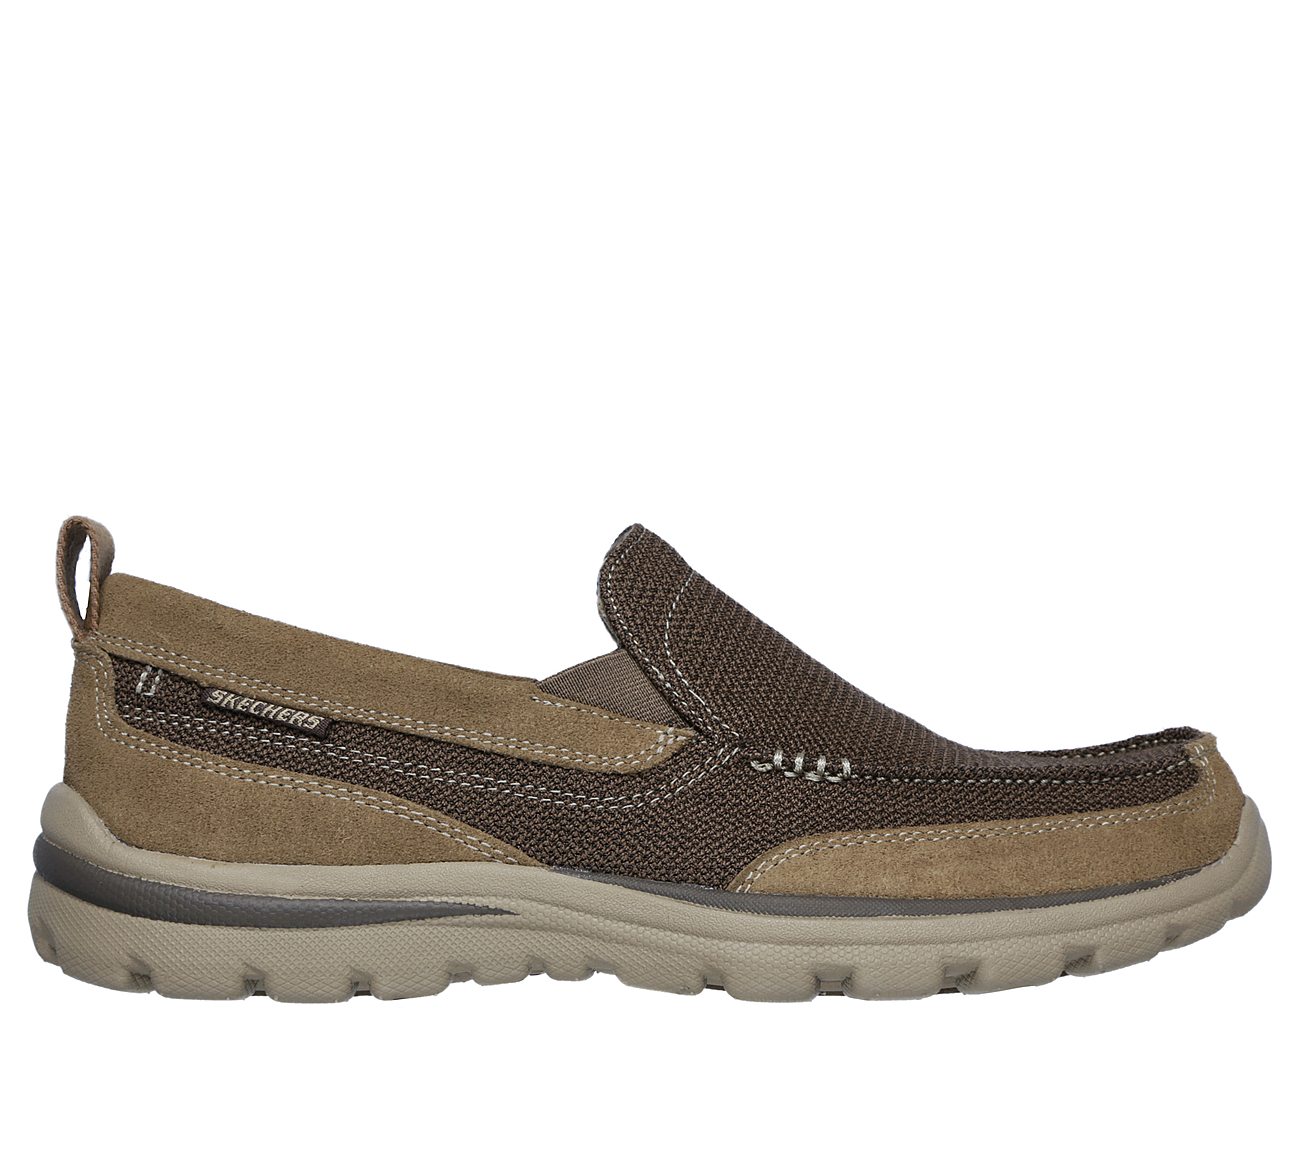 Buy SKECHERS Relaxed Fit: Superior - Milford Modern Comfort Shoes